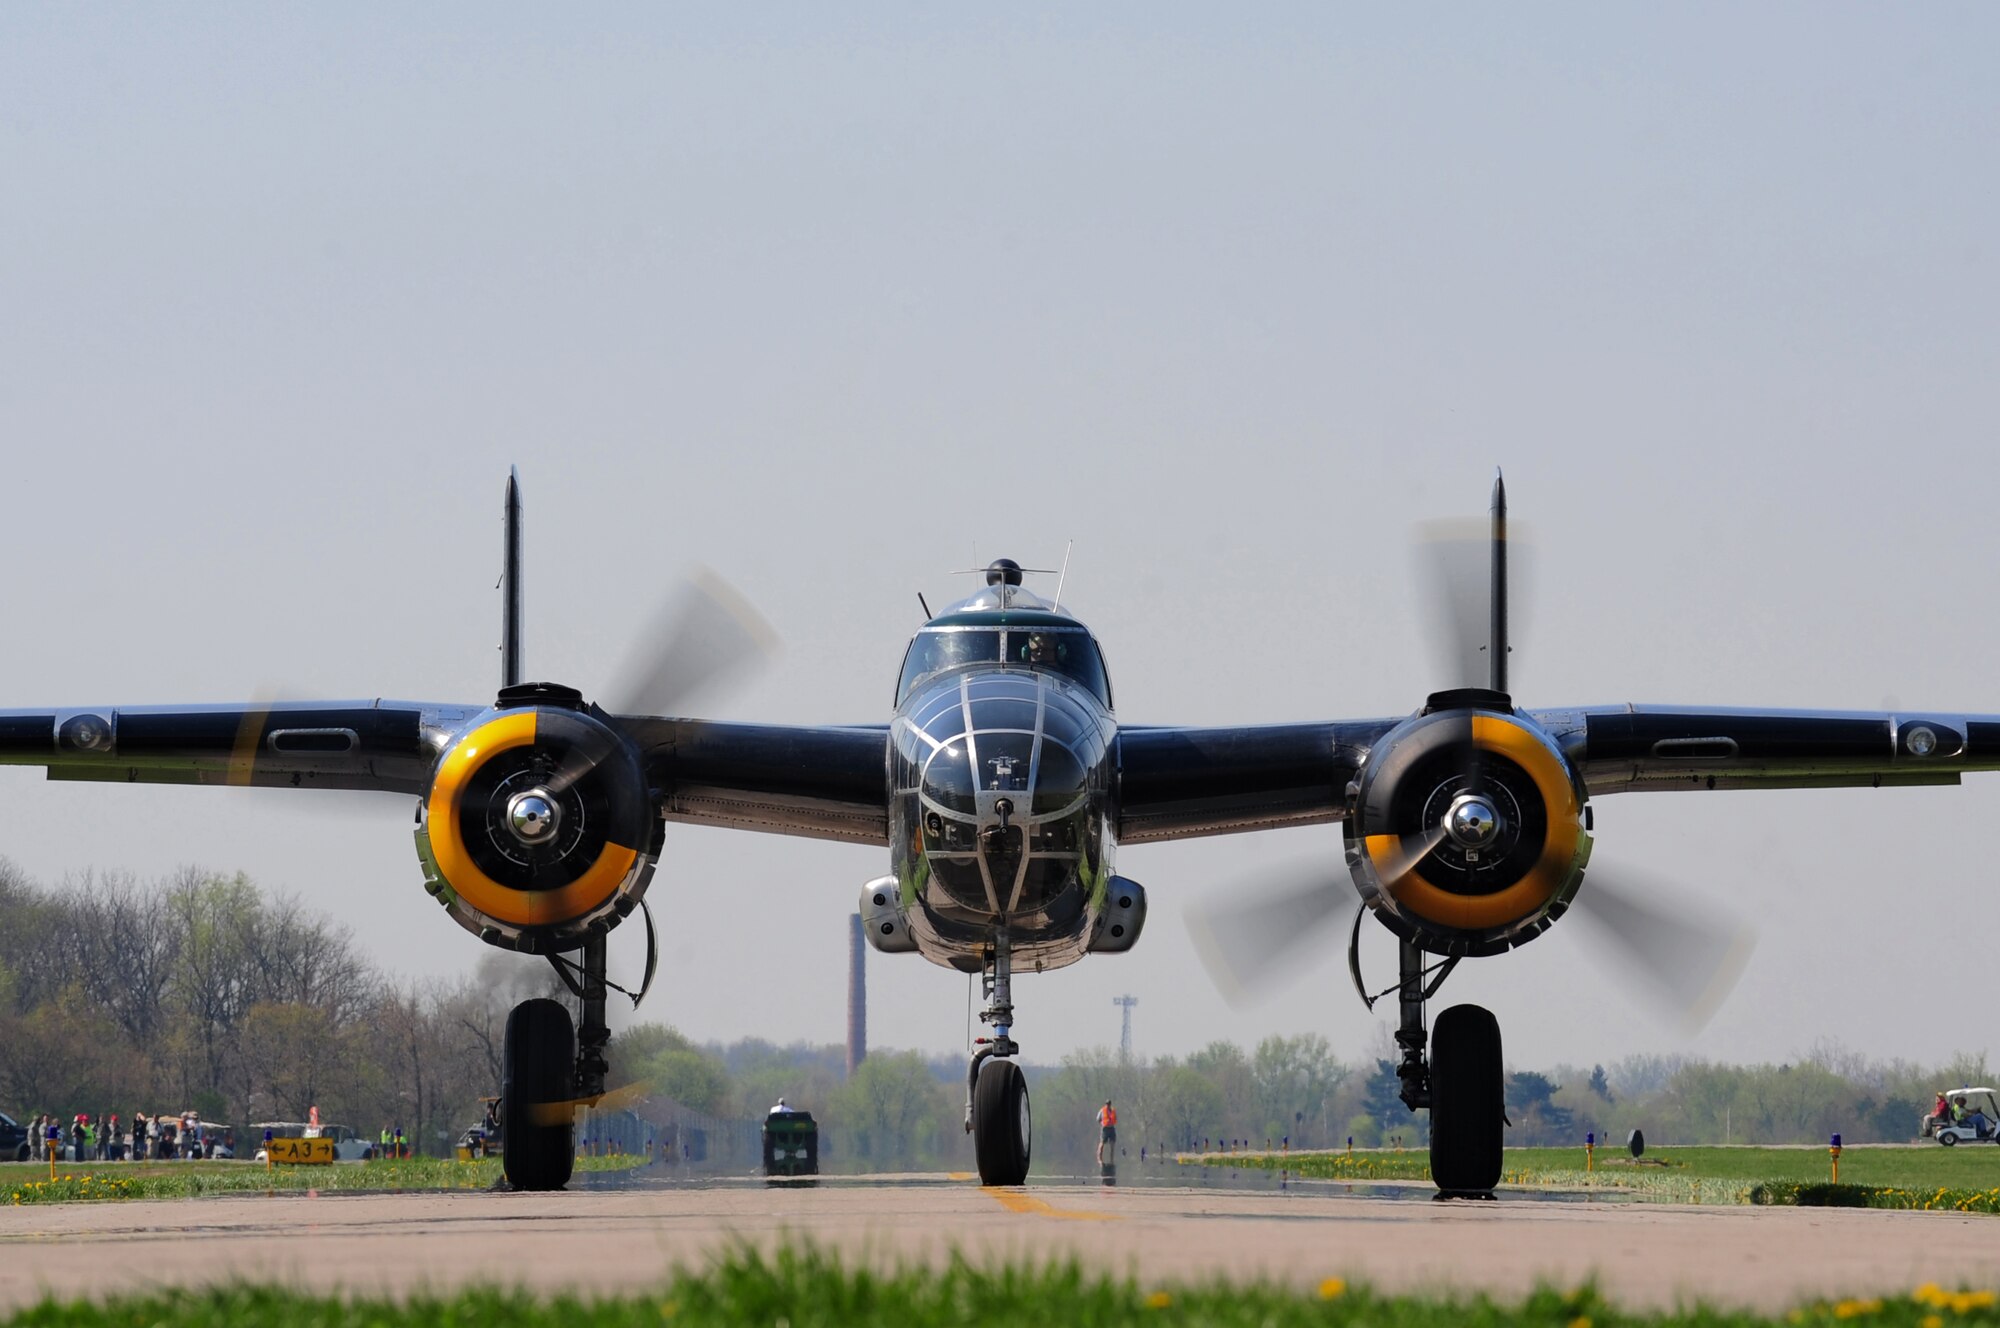 The "Pacific Prowler," a B-25 Mitchell Bomber, taxis the runway at Grimes Field, Ohio, April 15, 2010.  The B-25 crew flew from Fort Worth, Texas, to participate in commemoration flights for the Doolittle Raiders’ 68th reunion at Wright Patterson Air Force Base, Ohio.  The event honors the anniversary of the Doolittle Tokyo Raid.  On April 18, 1942, U.S. Army Air Forces Lt. Col. Jimmy Doolittle’s squad of 16 B-25s bombed targets over Japan in response to the Japanese attack on Pearl Harbor. (U.S. Air Force photo by Tech. Sgt. Jacob N. Bailey / Released)